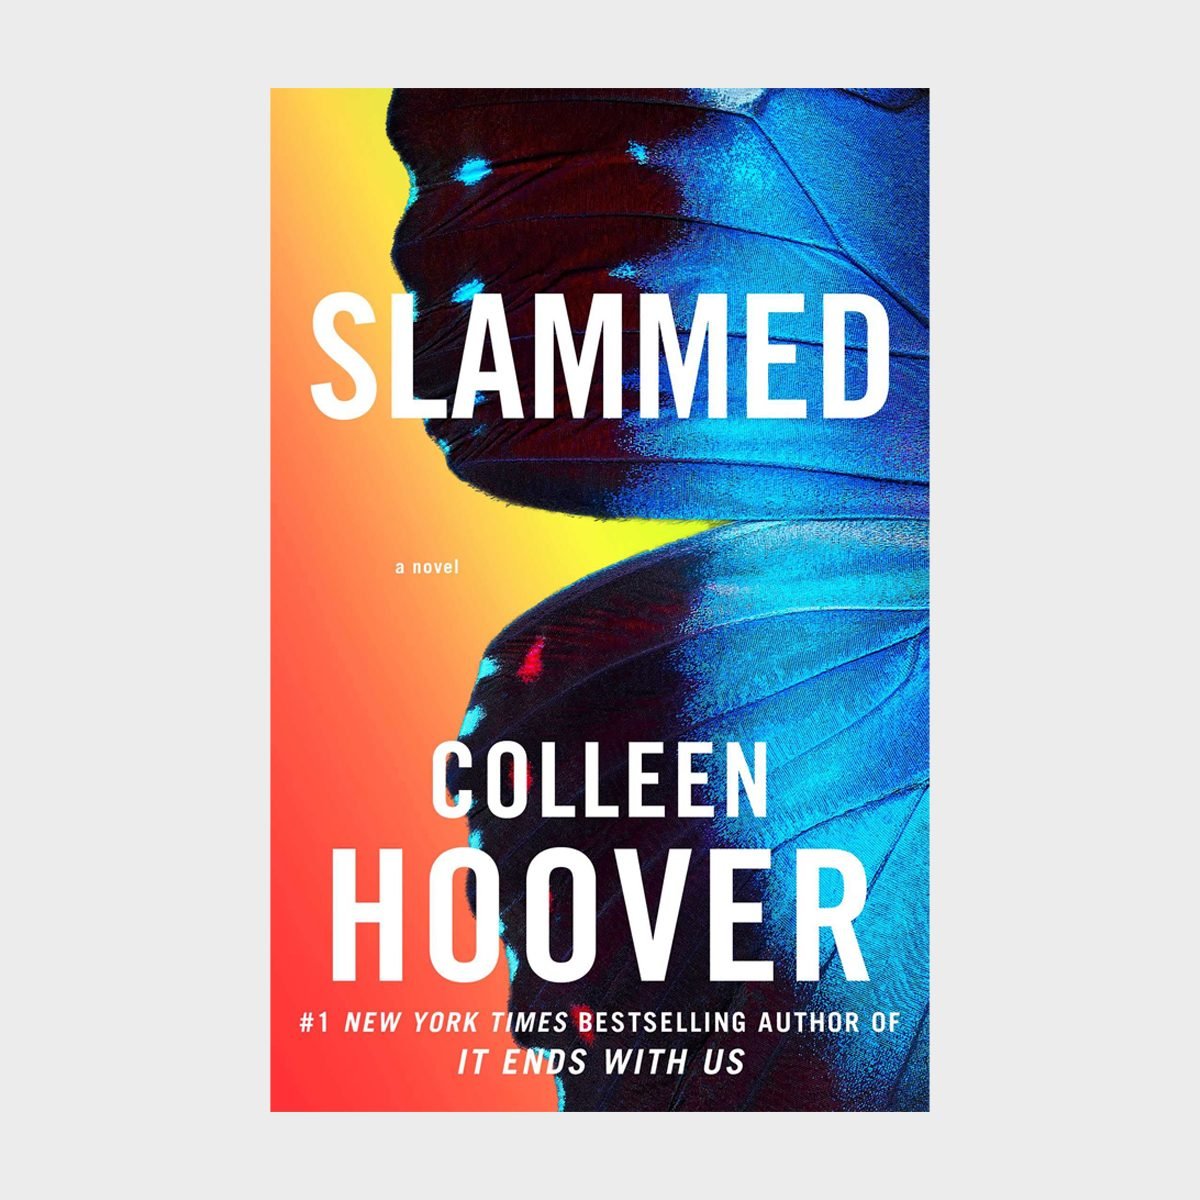 <p class=""><strong>Series starter: </strong><a href="https://www.amazon.com/Slammed-Novel-Colleen-Hoover/dp/1476715904/" rel="noopener noreferrer"><em>Slammed</em></a></p> <p class=""><strong>What you're in for: </strong>The sweeping intensity of falling hard for someone</p> <p>Colleen Hoover book series are few and far between—the bestselling author mostly writes stand-alone <a href="https://www.rd.com/list/best-fiction-books/" rel="noopener noreferrer">fiction books</a>. But her <em>Slammed</em> series consists of three books, the first of which was published in 2012. Eighteen-year-old Layken is struggling to be there for her mother and brother after the death of her father, but it's difficult. Then she meets Will Cooper, a neighbor with a passion for slam poetry. The two form an intense emotional connection only to discover a shocking secret that pulls them apart. But Will and Layken can't seem to suppress the feelings they have for each other, and it becomes impossible to stay away. Hoover is currently the No. 1 bestselling romance author—her romances are besting books in all sorts of genres—so you're going to want to get your hands on this series.</p> <p class="listicle-page__cta-button-shop"><a class="shop-btn" href="https://www.amazon.com/Slammed-Novel-Colleen-Hoover/dp/1476715904/">Shop Now</a></p>